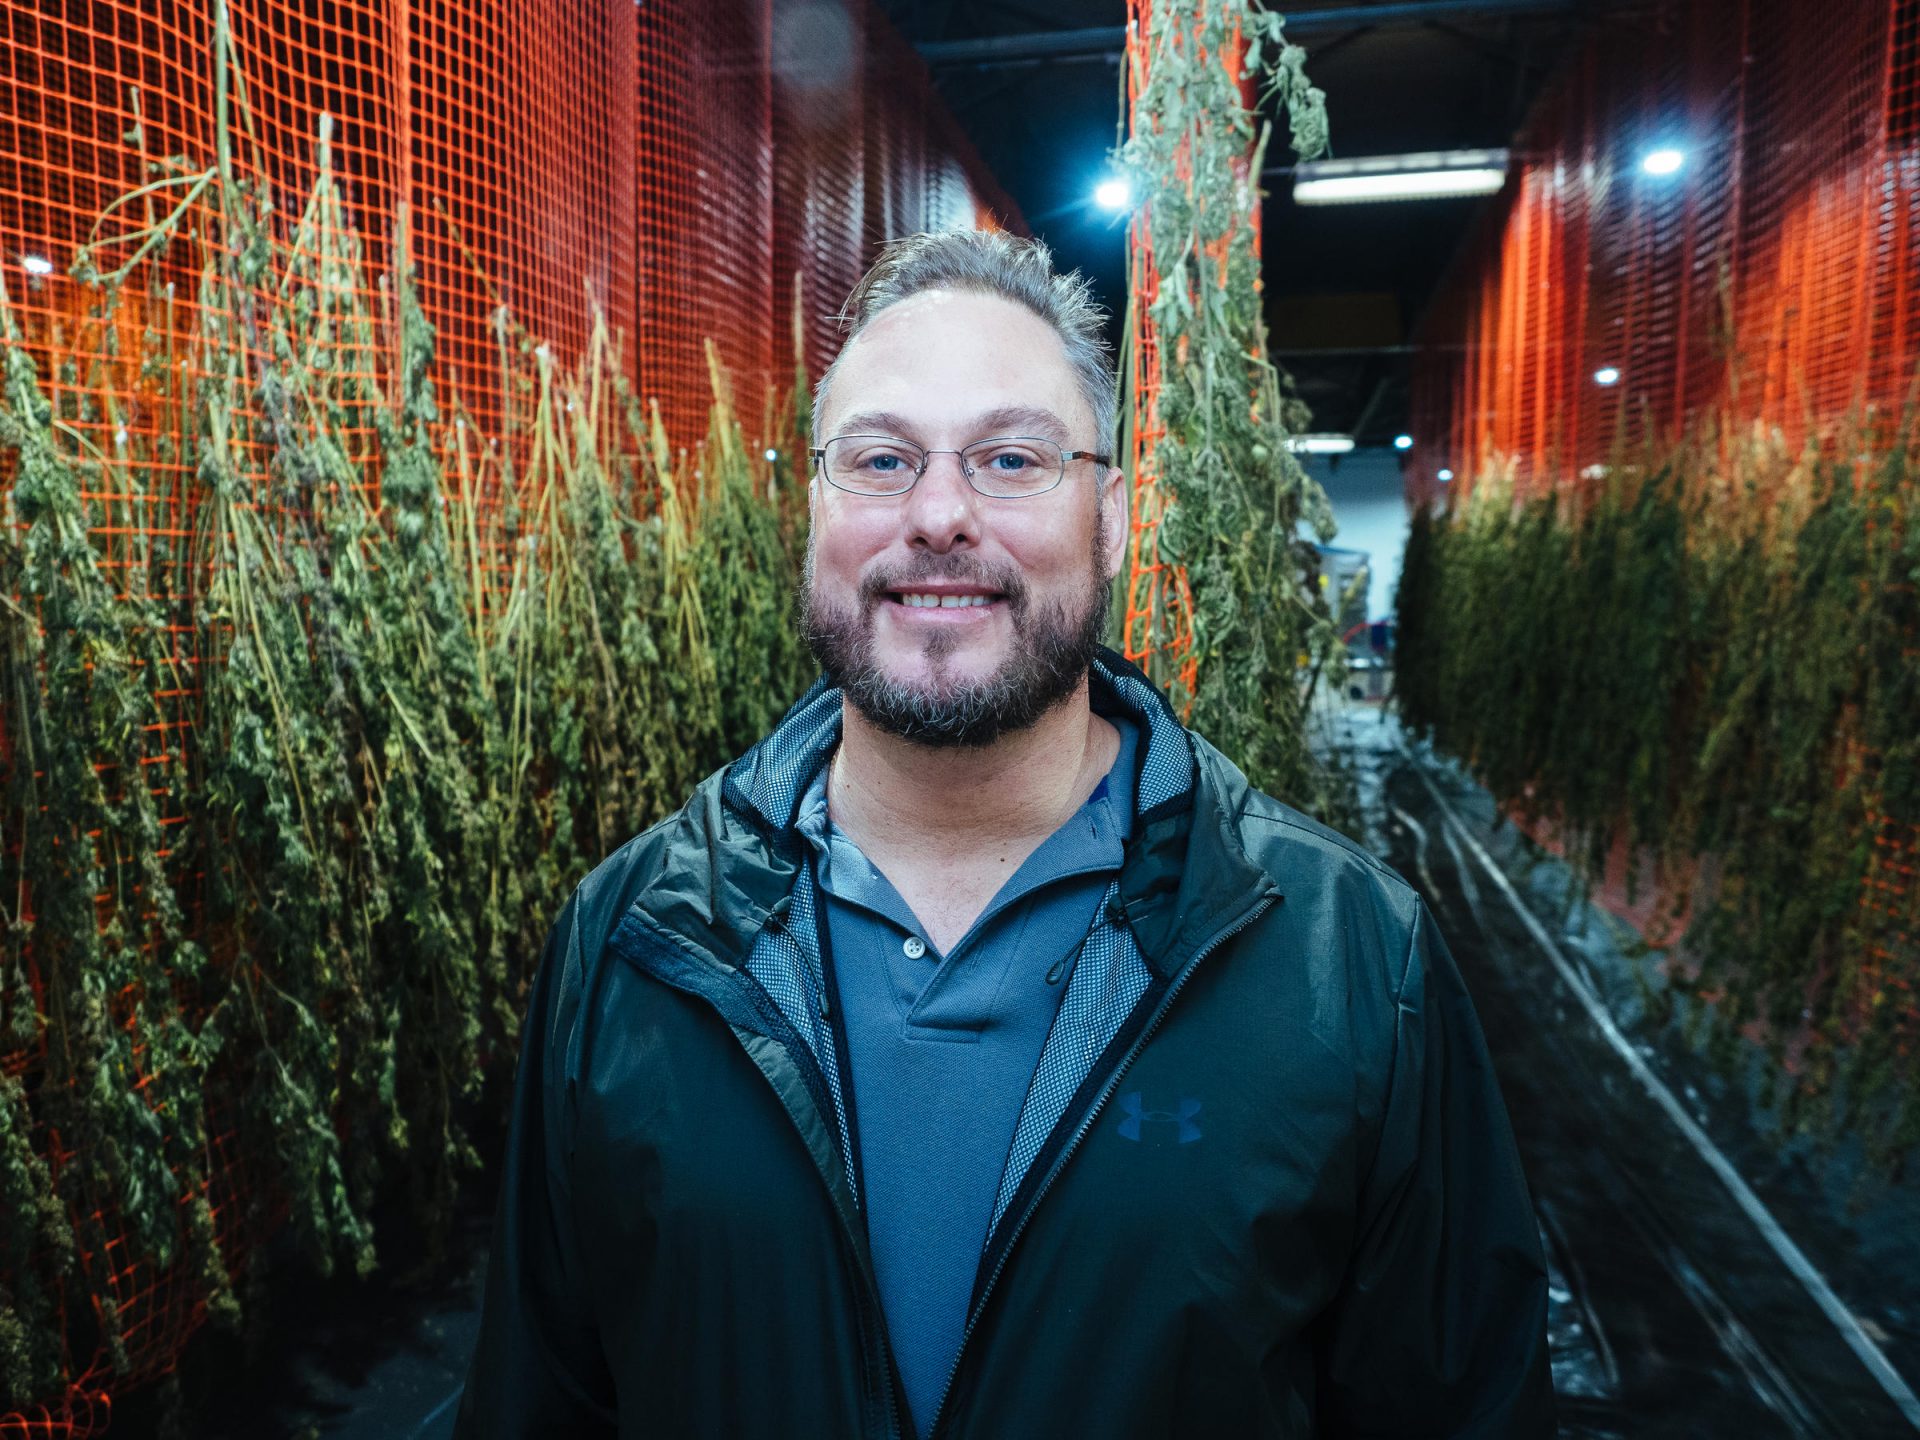 Eric Mattmuller is AgraPharm's chief engineering officer. He's hoping to avoid the pitfalls of a rainy spring by starting seeds in a greenhouse next year.